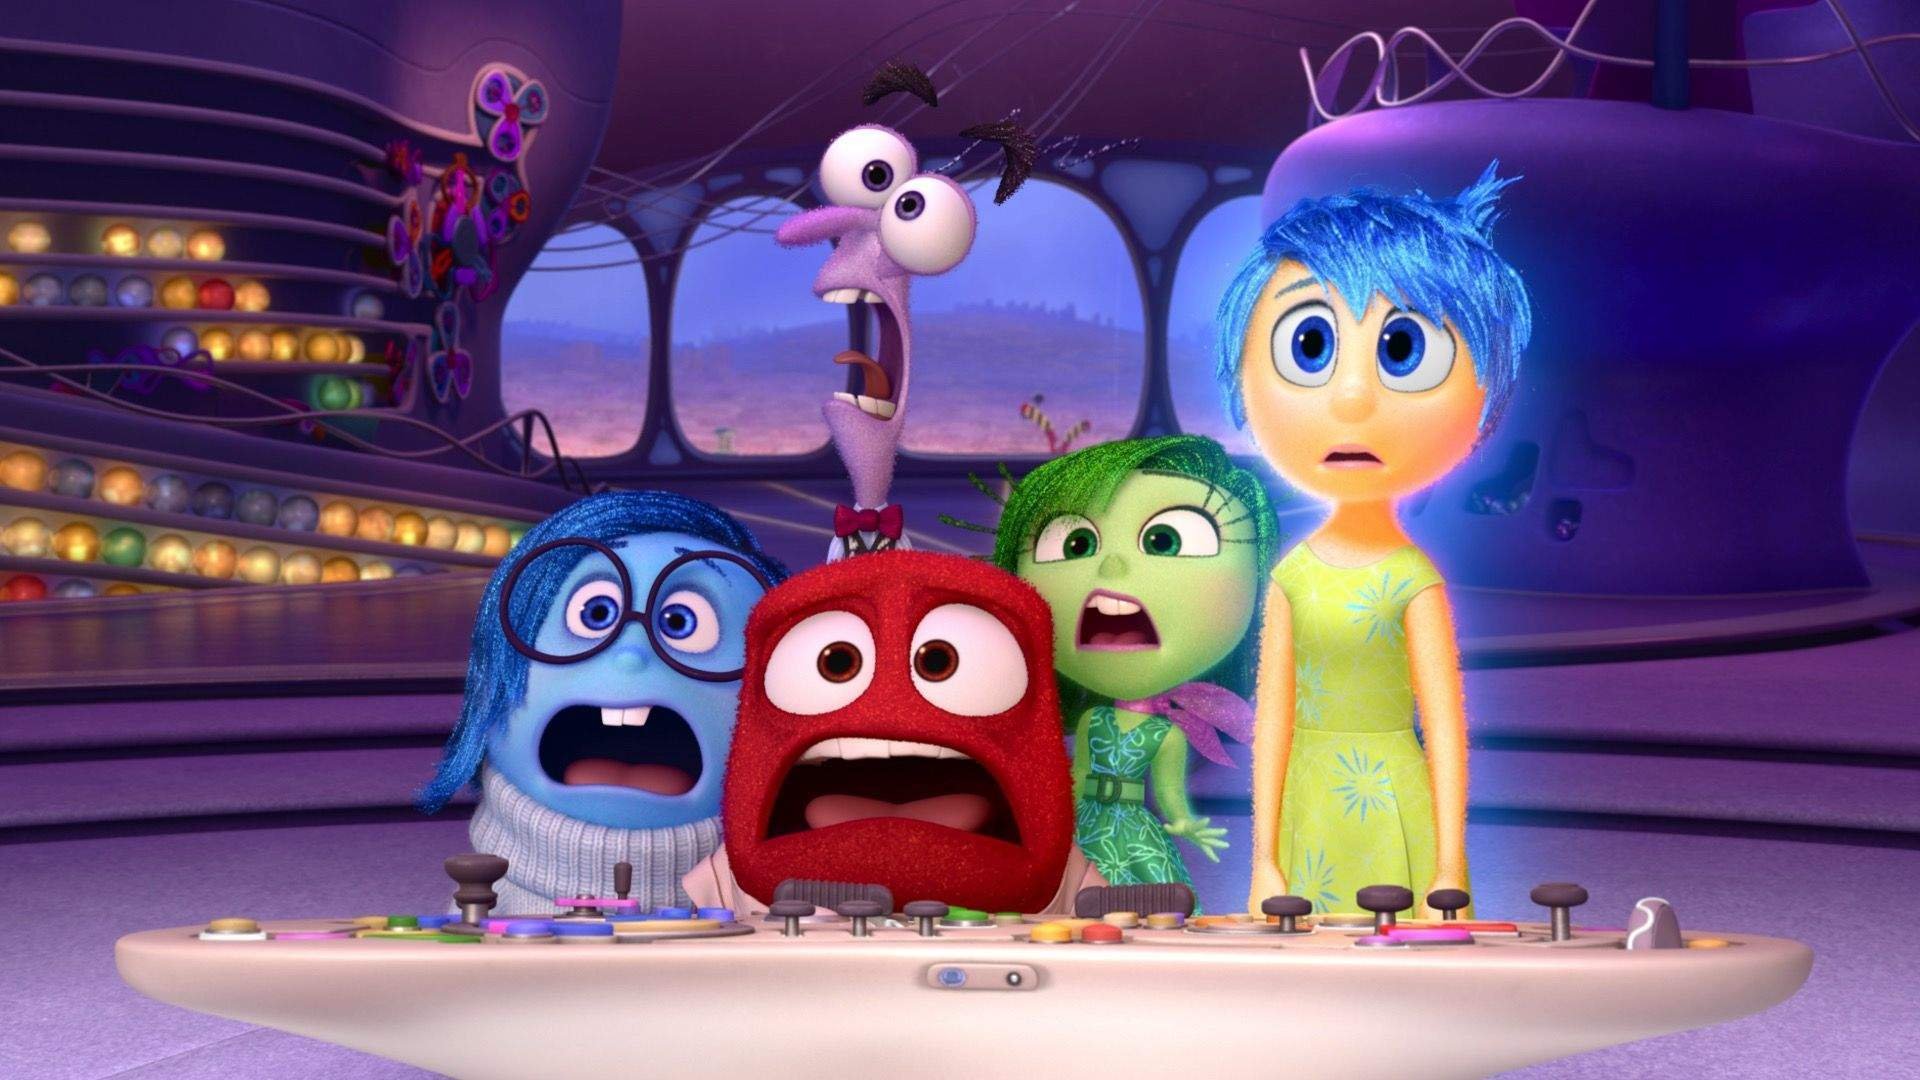 video review : Inside Out